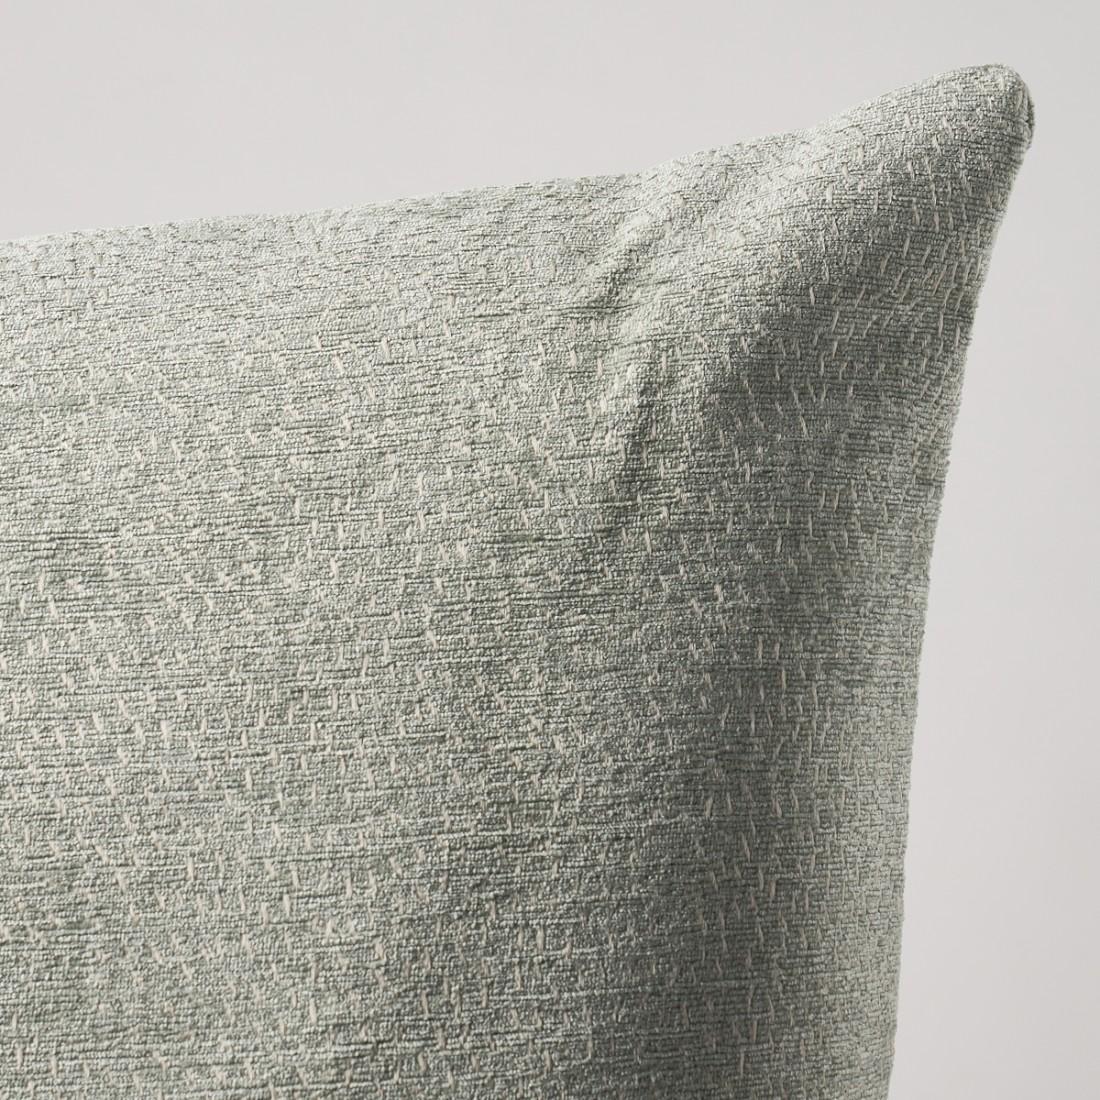 This pillow features Menemsha by Caroline Z Hurleywith a knife edge finish. A small-scale pattern by Caroline Z Hurley, this versatile and luxurious jacquard weave is upholstery weight. Thick and thin chenille weft yarns give it an artisanal